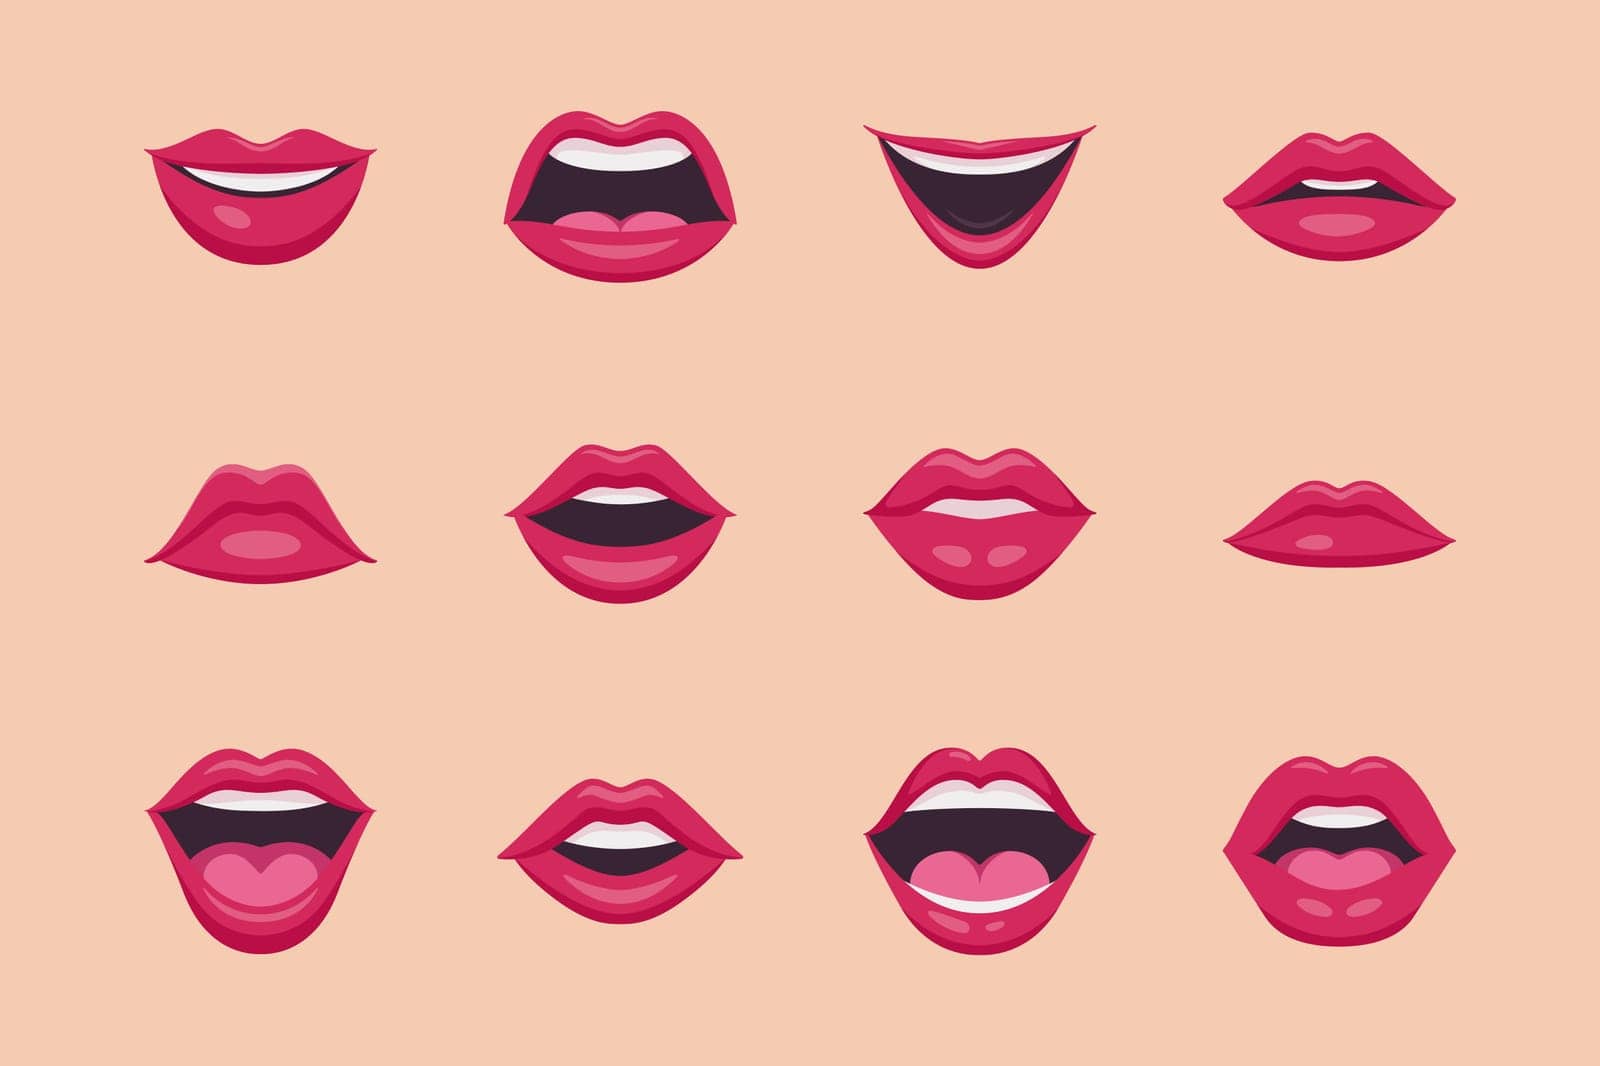 Flat Vector Red Female Lips Icon Set Closeup. Woman Lips, Different Expressions, Emotions. Smile, Kiss, Beauty Concept. Modern Pop Art Cartoon Comic Style, Simple Design by Gomolach